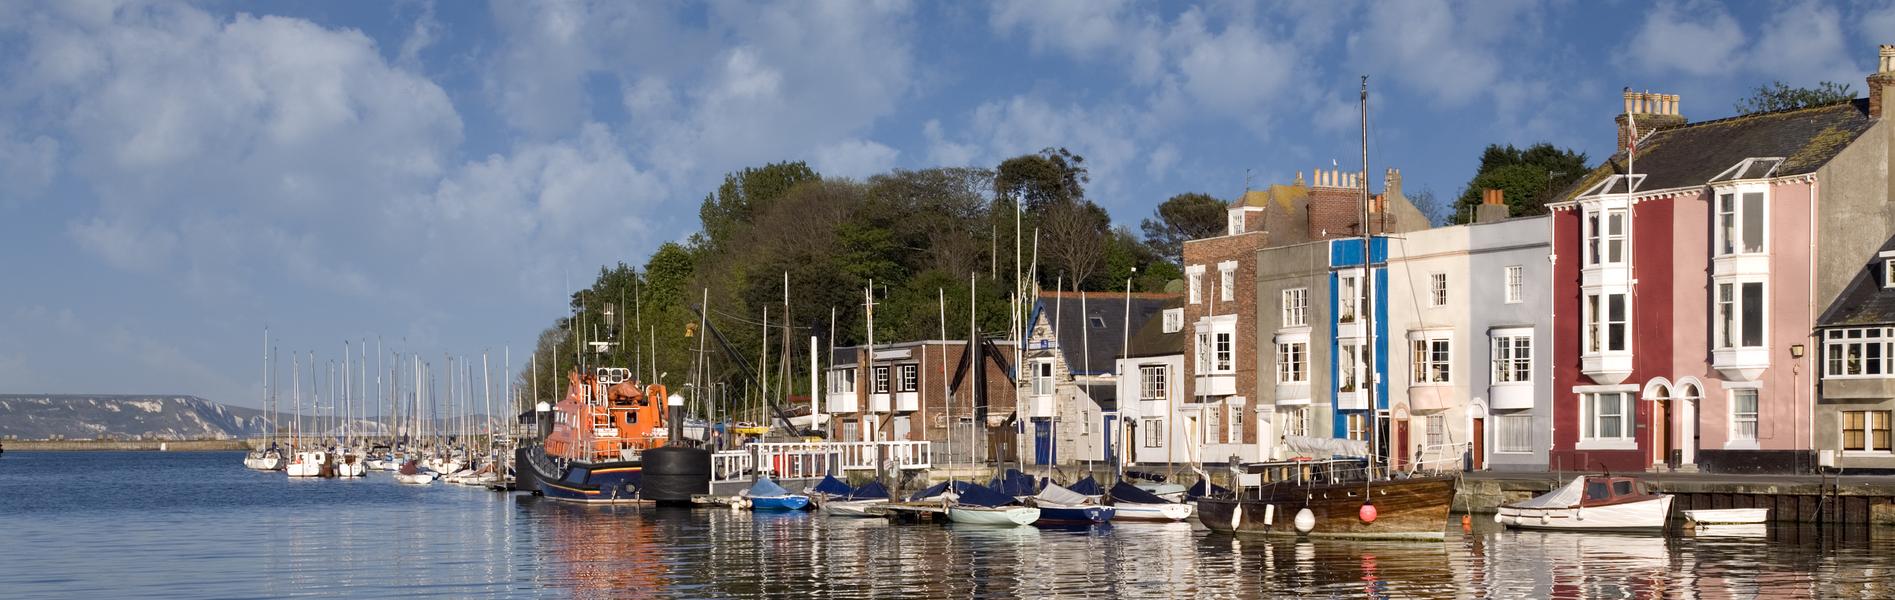 Holiday lettings & accommodation in Weymouth - Wimdu